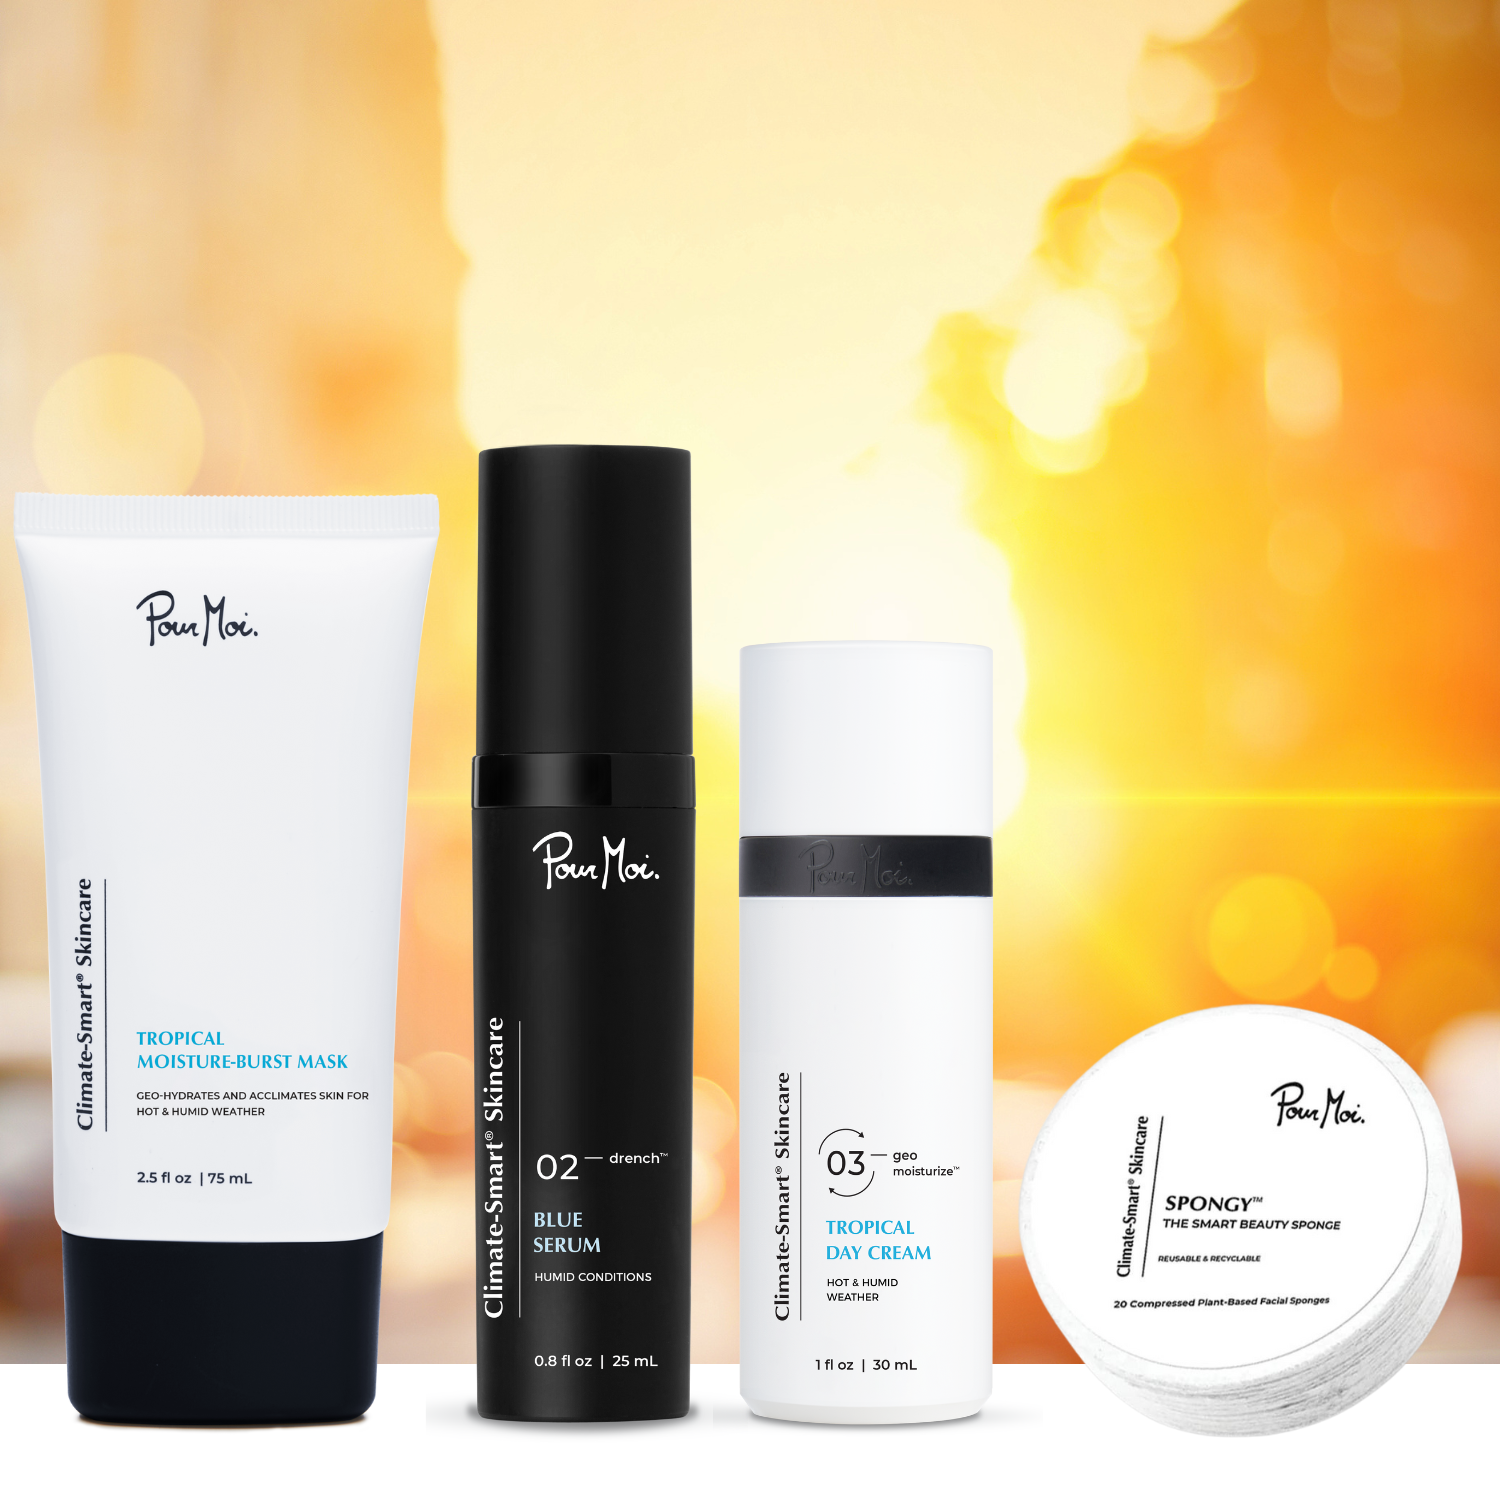 Harmonize your skin with the humid summer weather